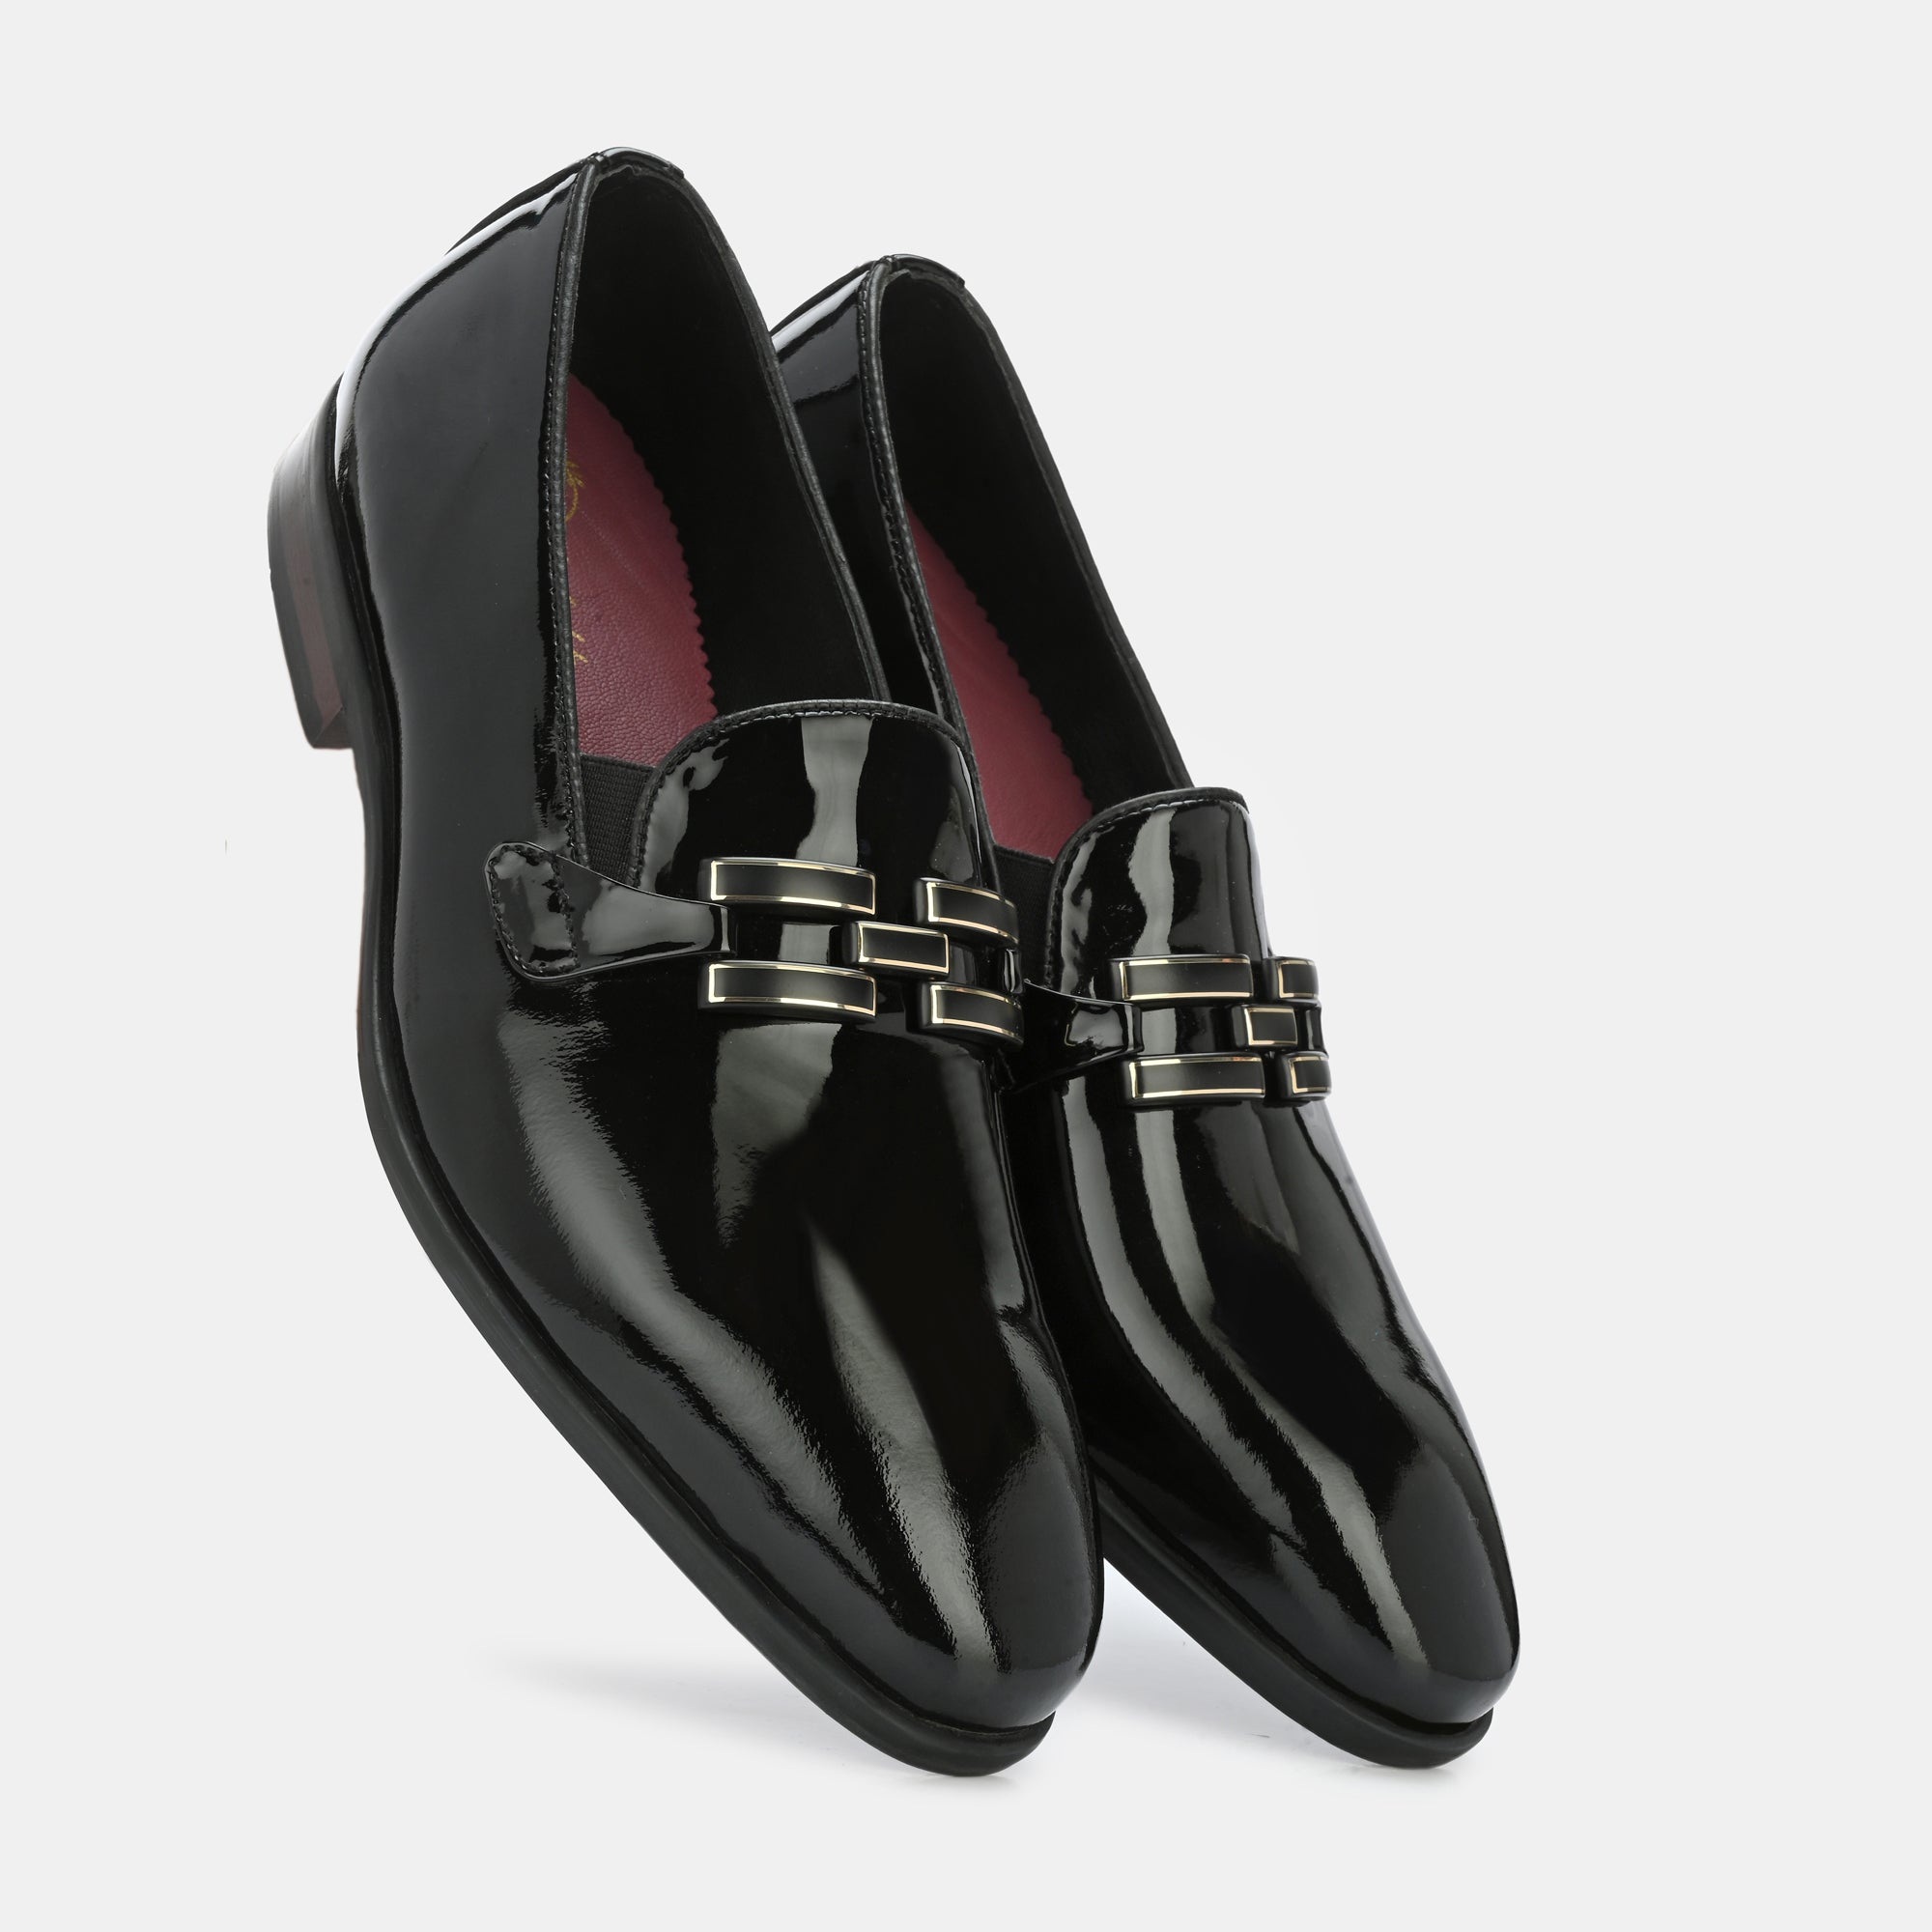 Patent Black Buckled Moccasins by Lafattio